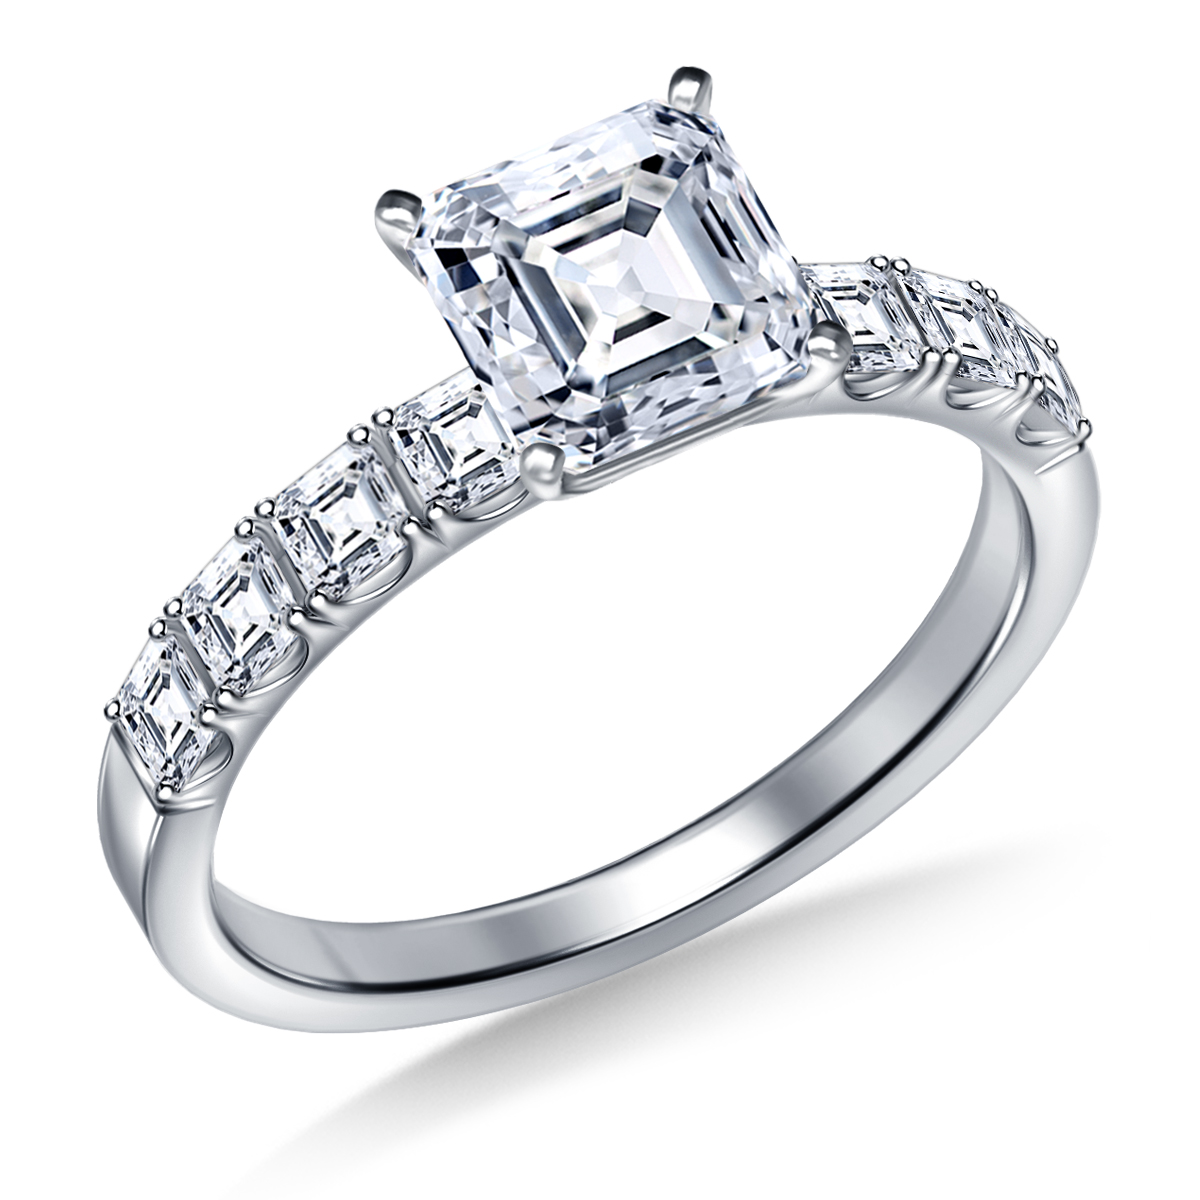 Diamond Engagement Ring with Asscher Cut Diamond Accents in 14K White Gold